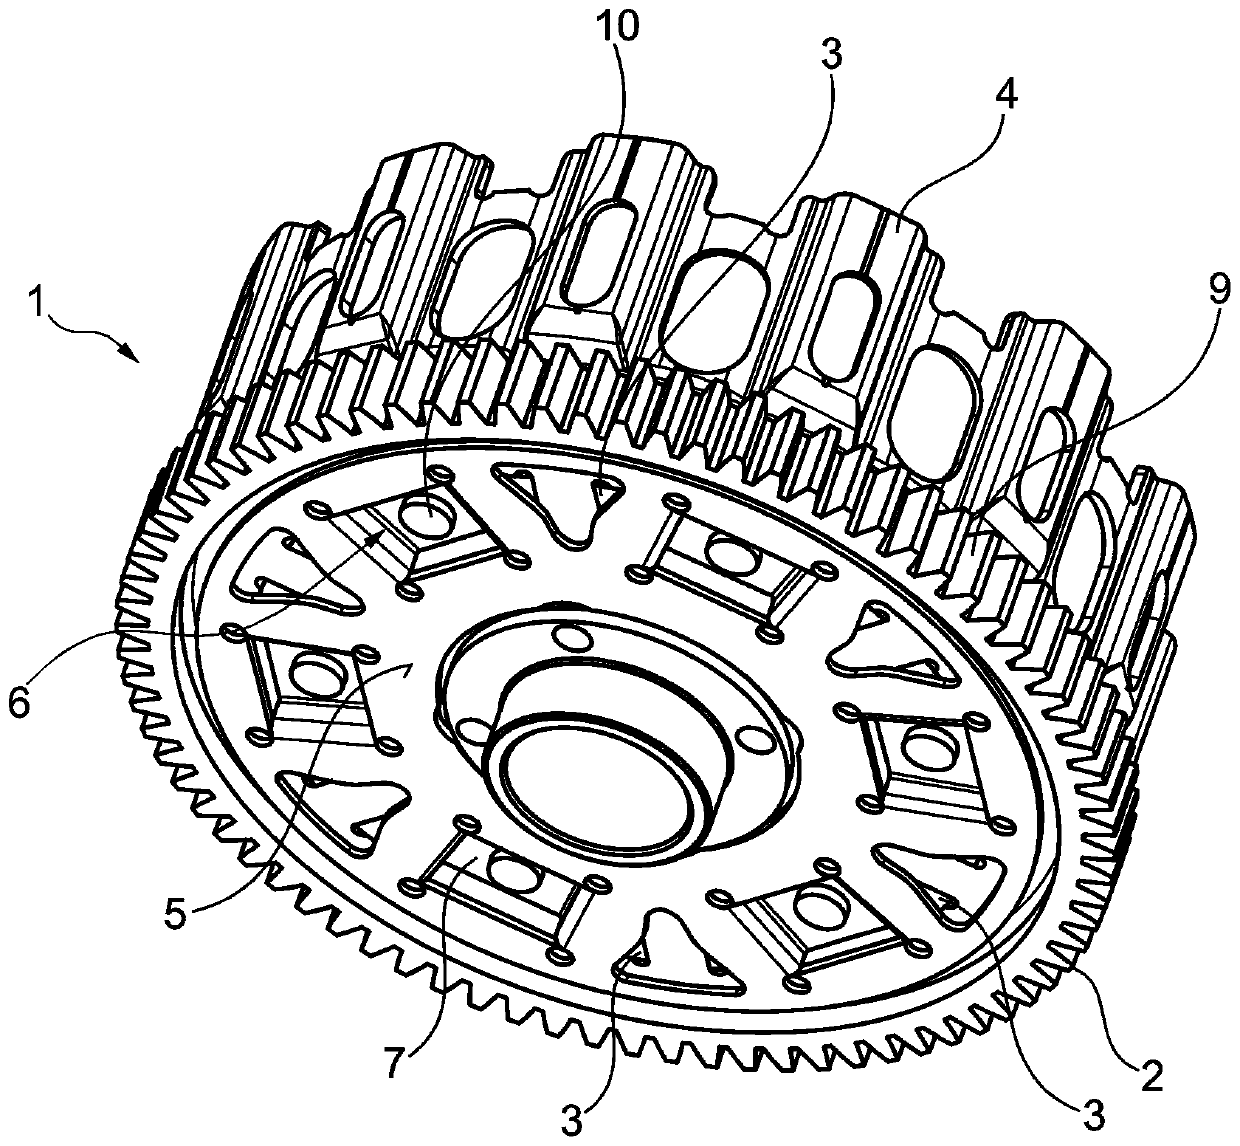 Clutch cage arrangement having primary gearwheel and having stamped indentation, projecting into said primary gearwheel, of counterpart plate or of disk